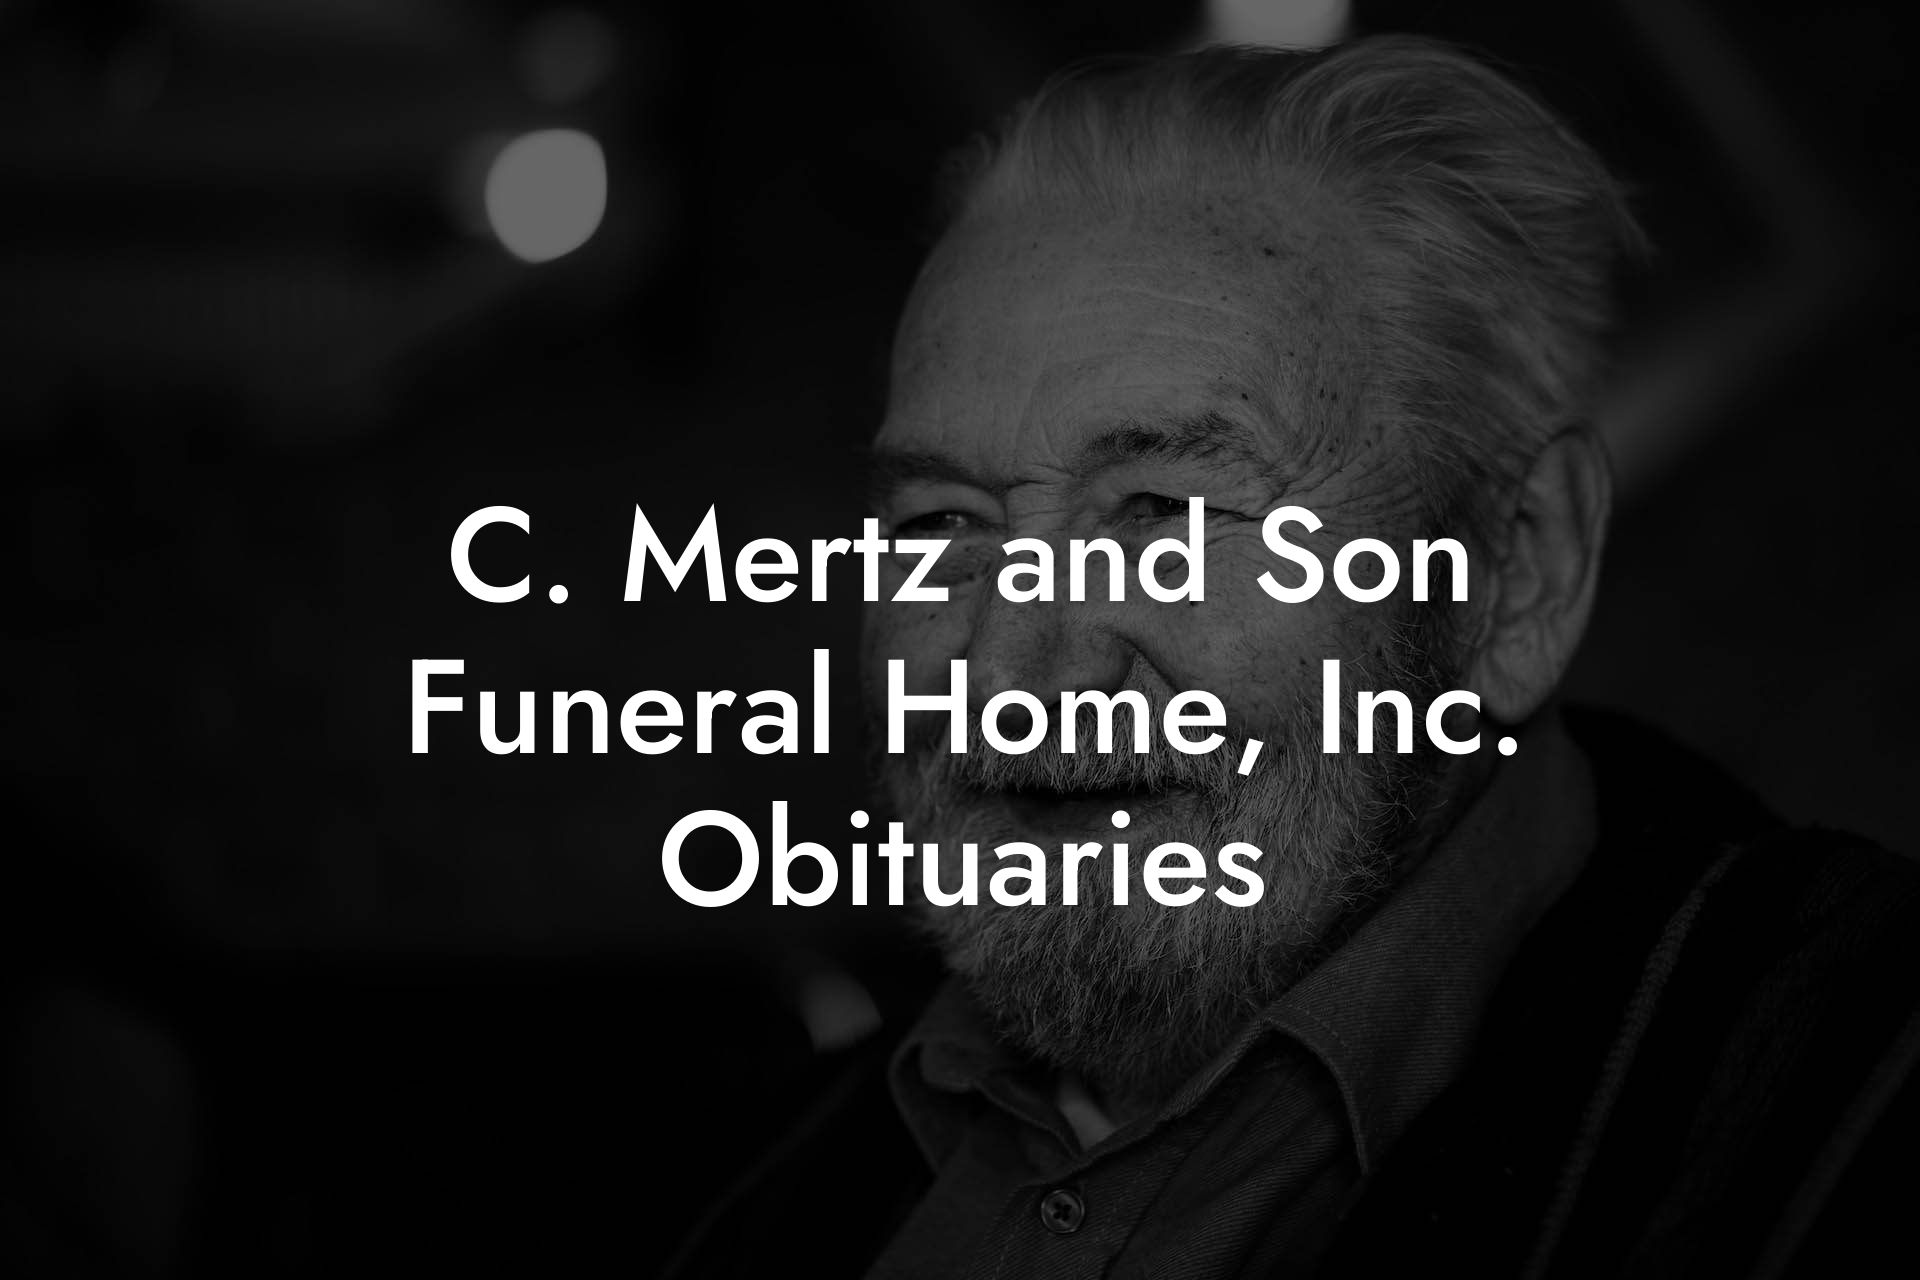 C. Mertz and Son Funeral Home, Inc. Obituaries